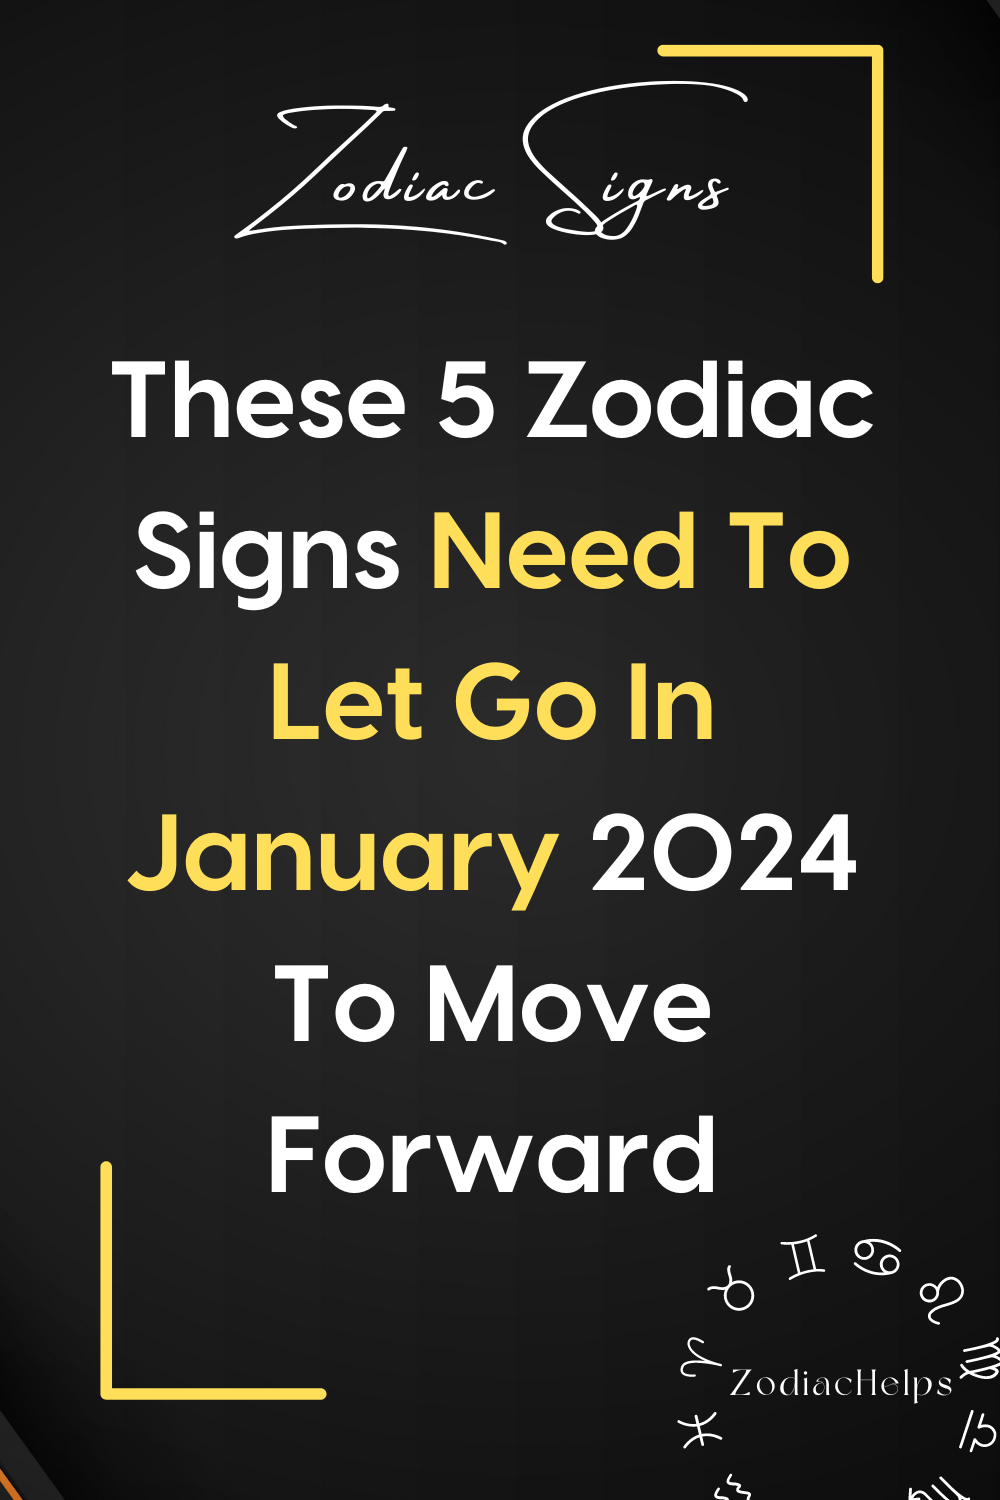 These 5 Zodiac Signs Need To Let Go In January 2024 To Move Forward